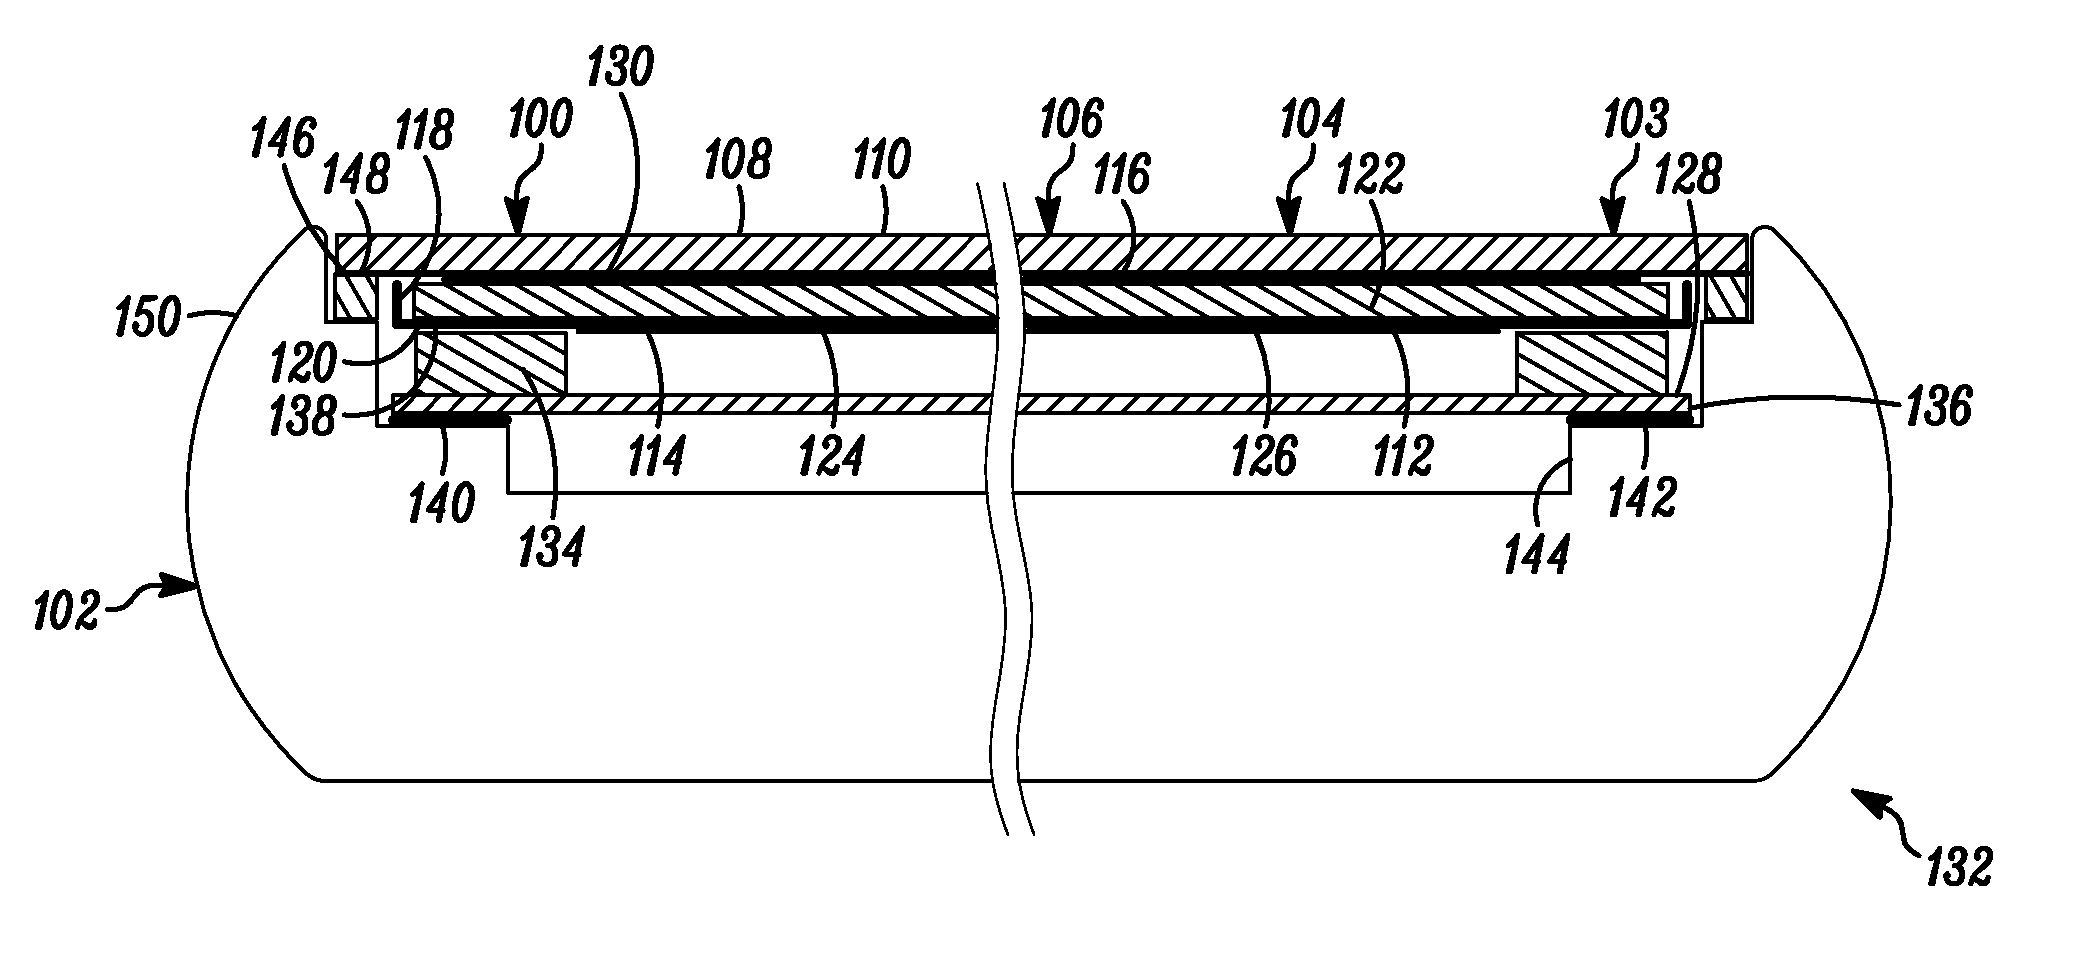 Display Structure with Direct Piezoelectric Actuation